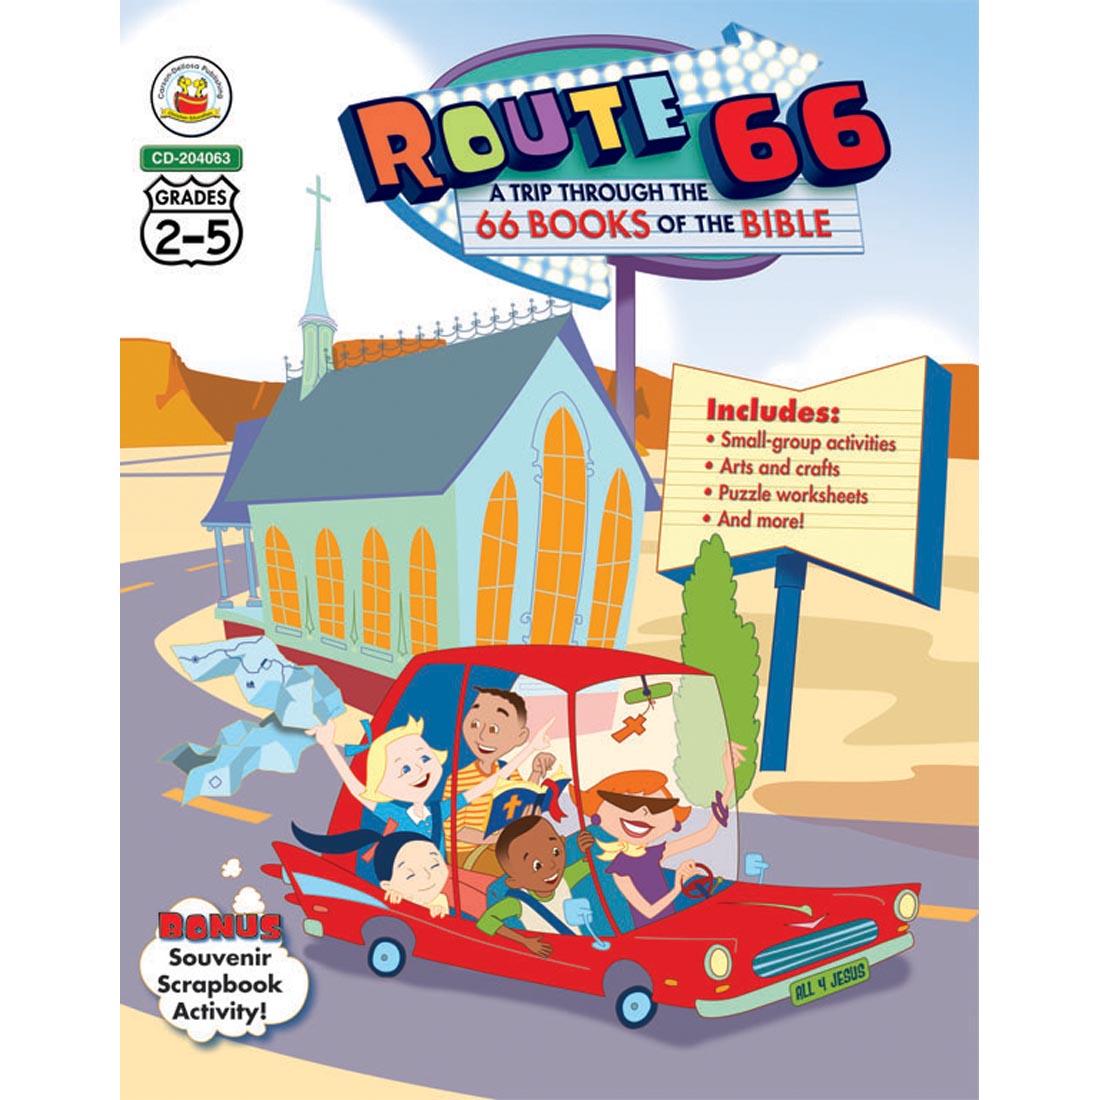 Route 66: A Trip through the 66 Books of the Bible by Carson Dellosa